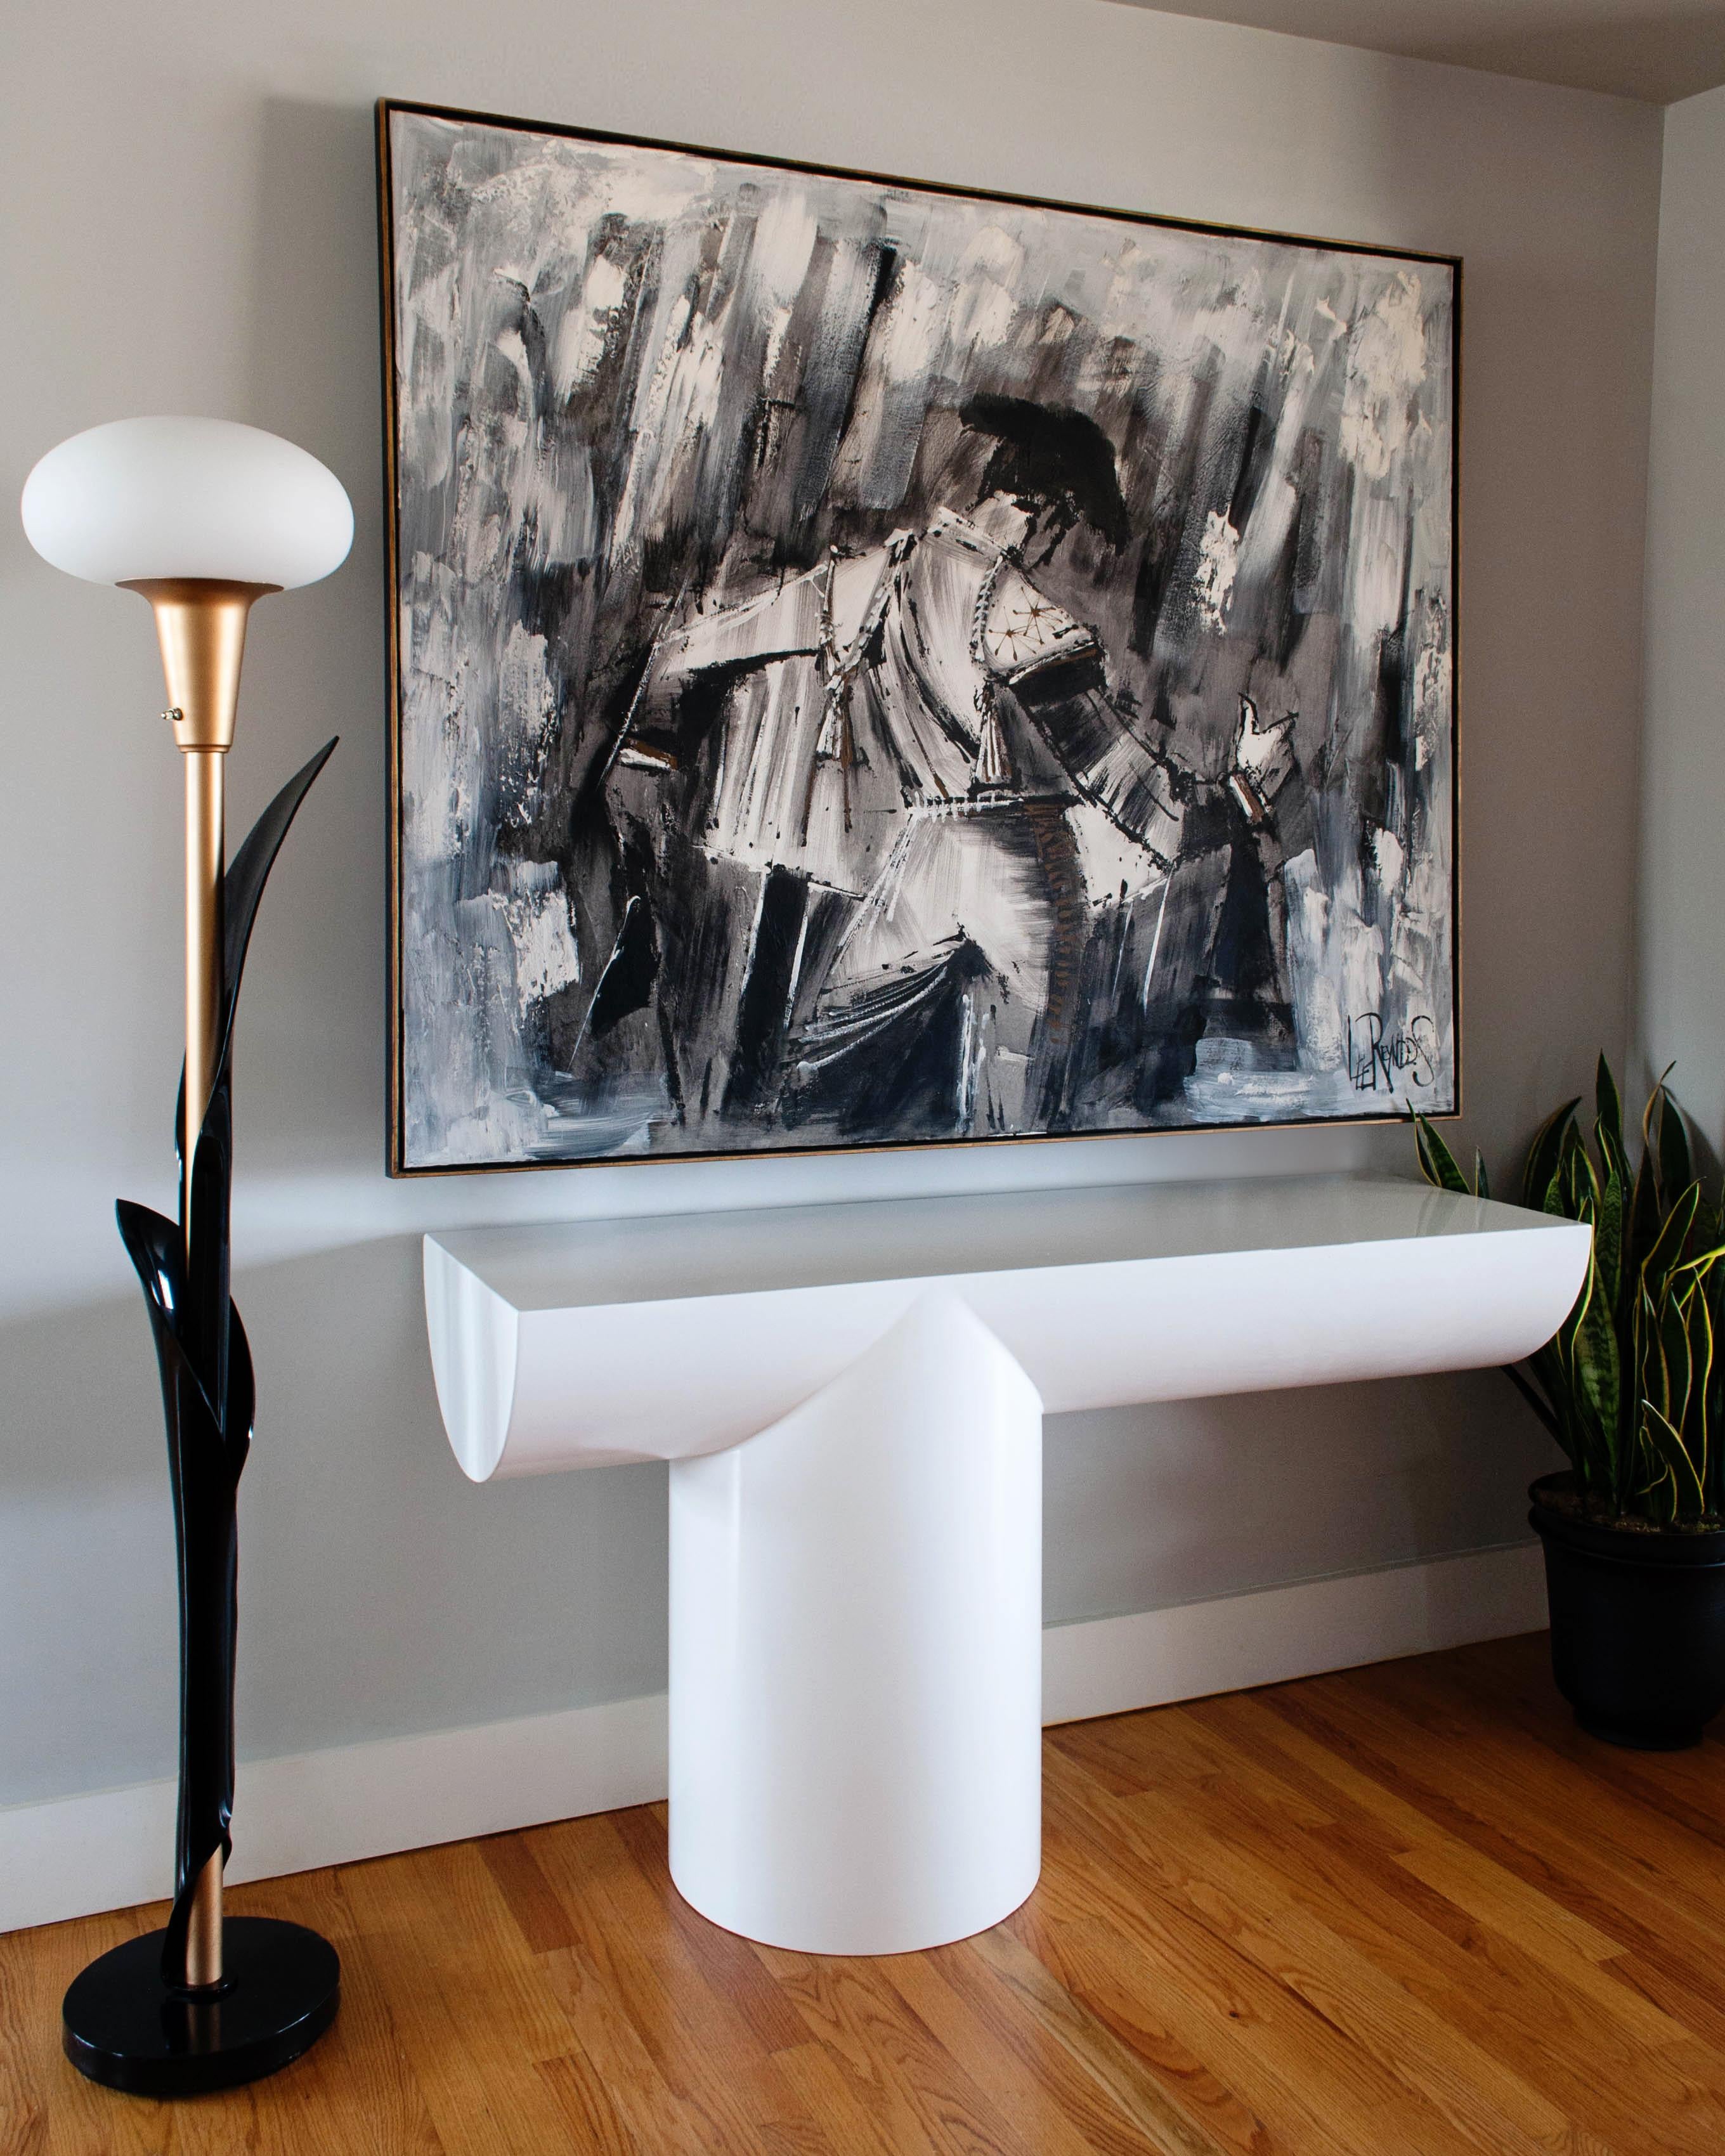 Fantastic, huge, modernist matador oil painting by Lee Reynolds produced at Vanguard Studios in Beverly Hills, California. The original painting depicts a Spanish matador wearing a hat, detailed jacket and cape in shades of white, black and gray